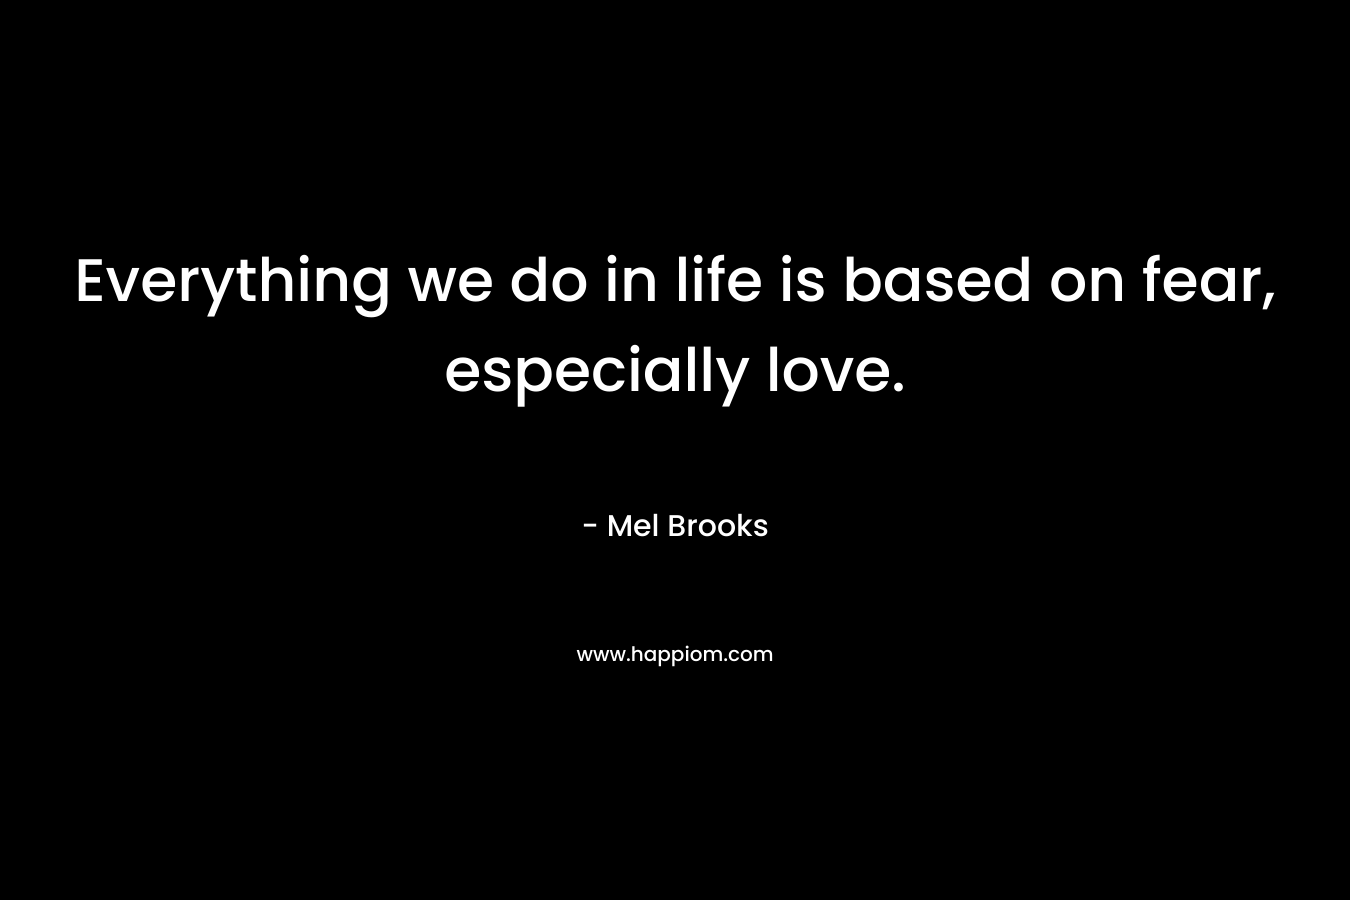 Everything we do in life is based on fear, especially love. – Mel Brooks